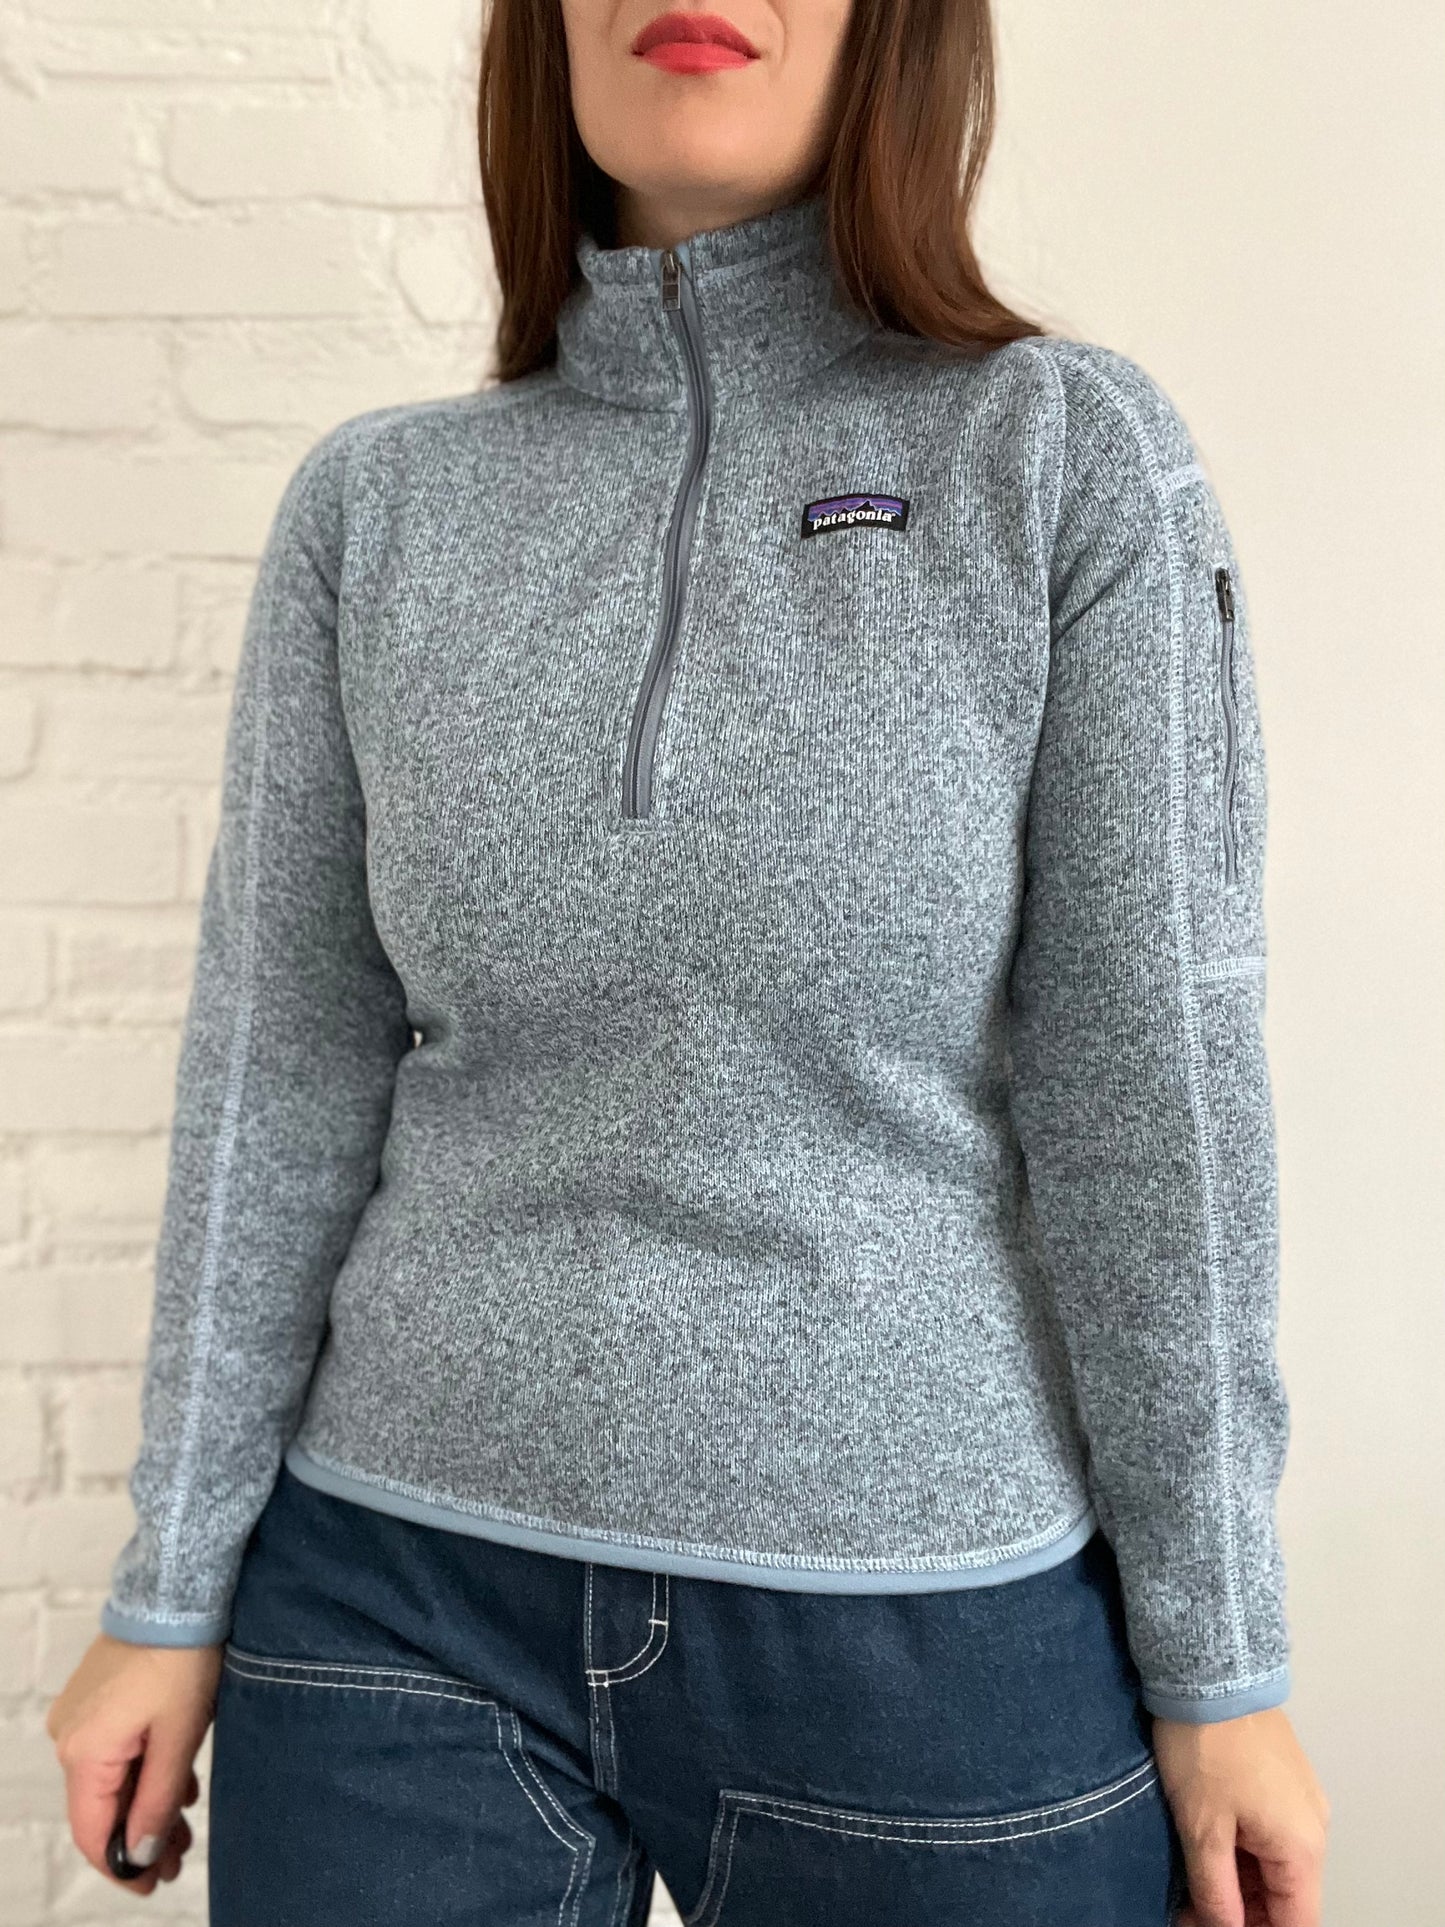 Patagonia Better Sweater 1/4th Zip - Size M